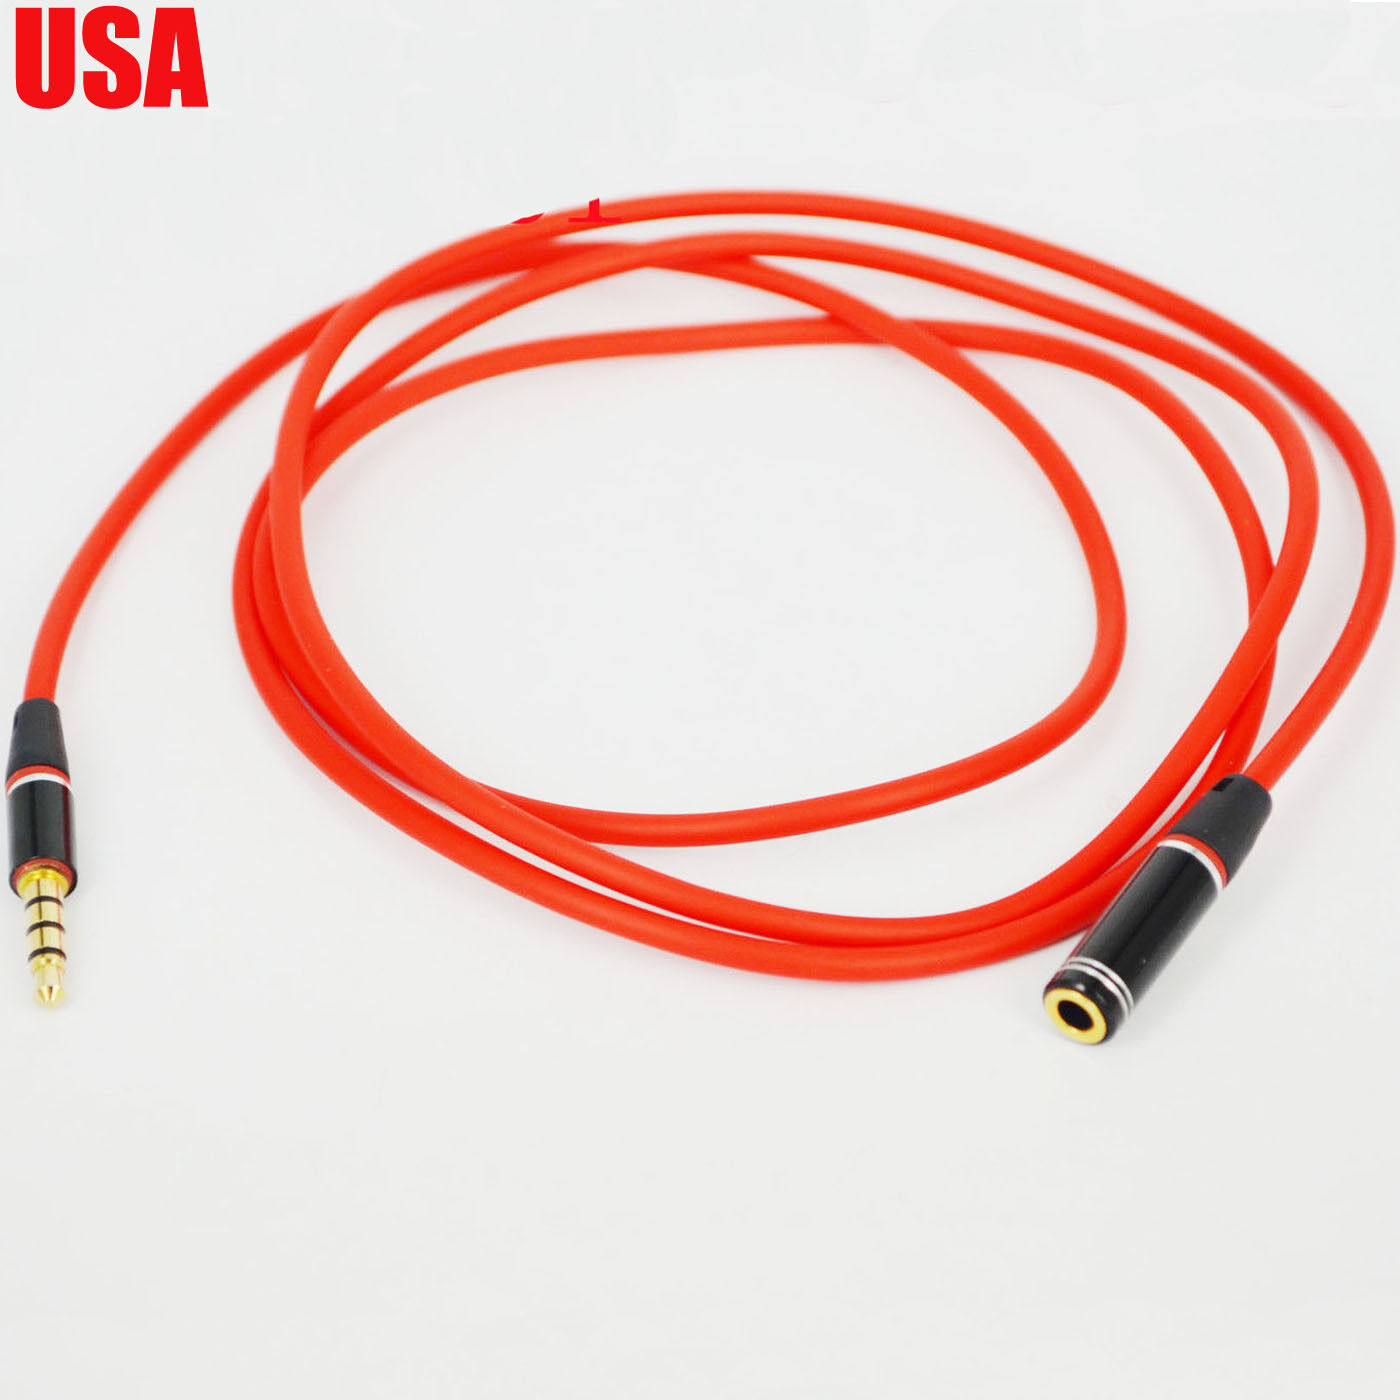 Primary image for 3.5Mm Headphone Earphone Earbud Extension Cable For Samsung Galaxy S3/S4/Note 2